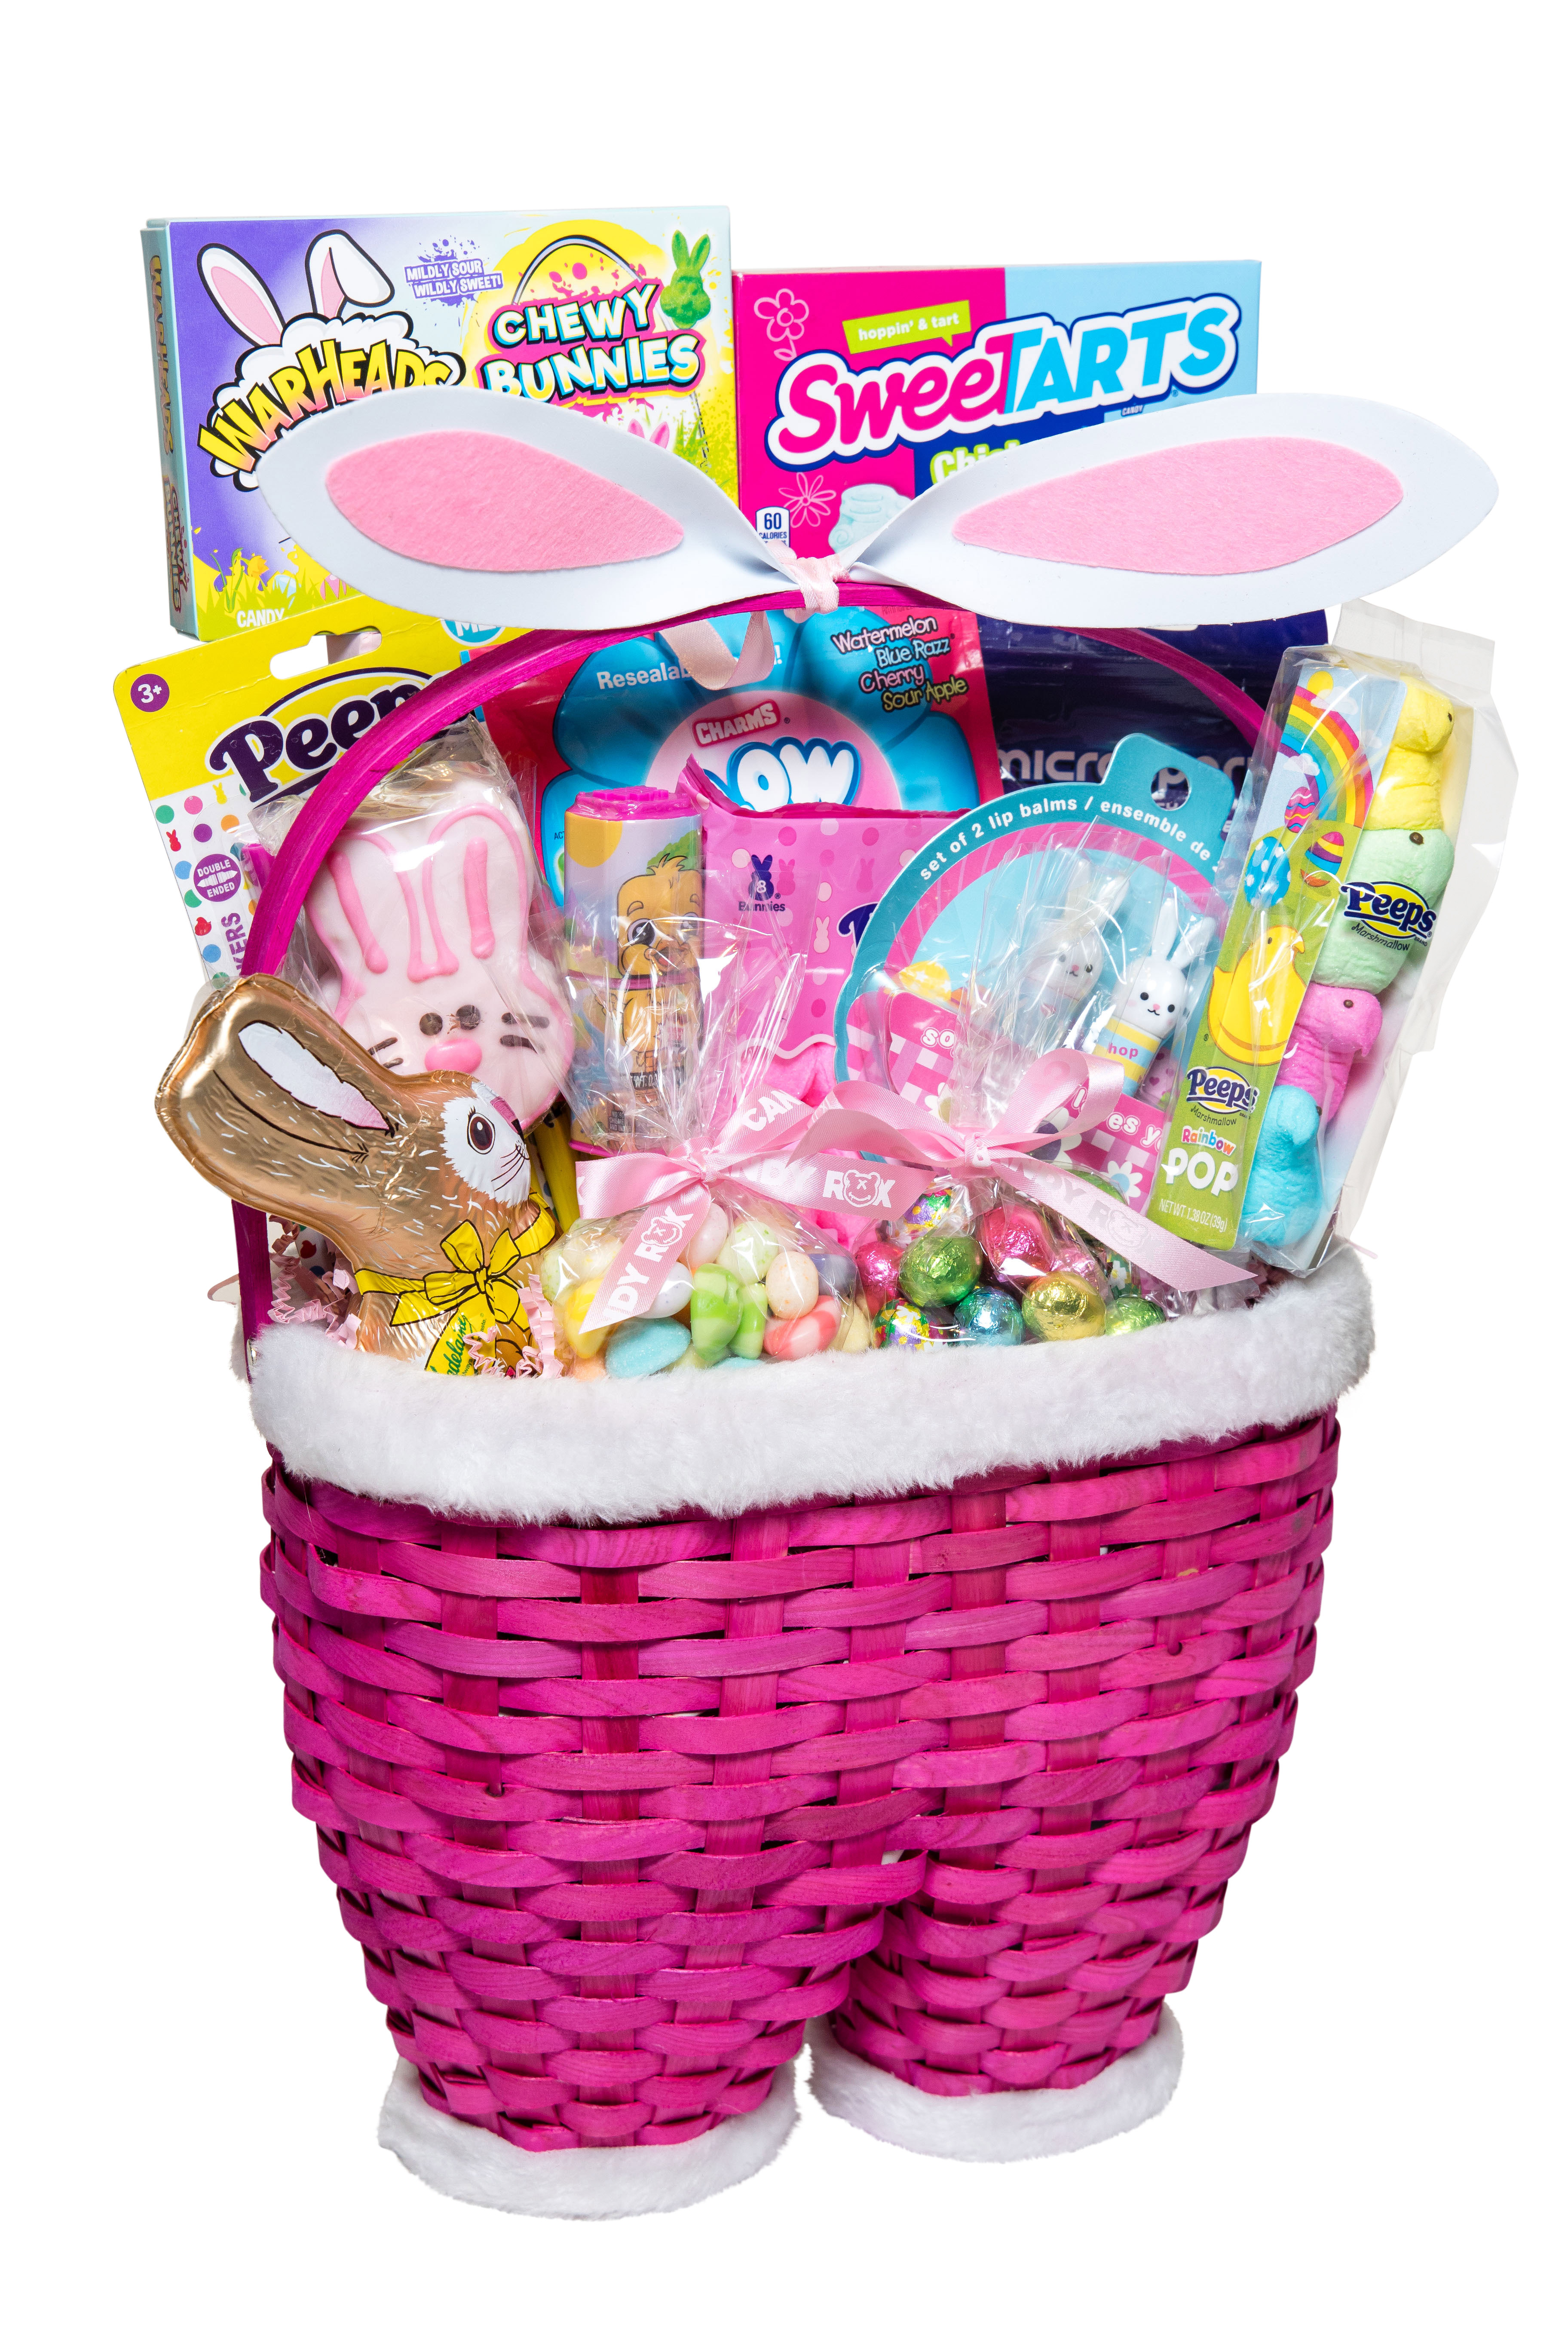 product photography, commercial photography, candy, product packaging, colorful, customized baskets